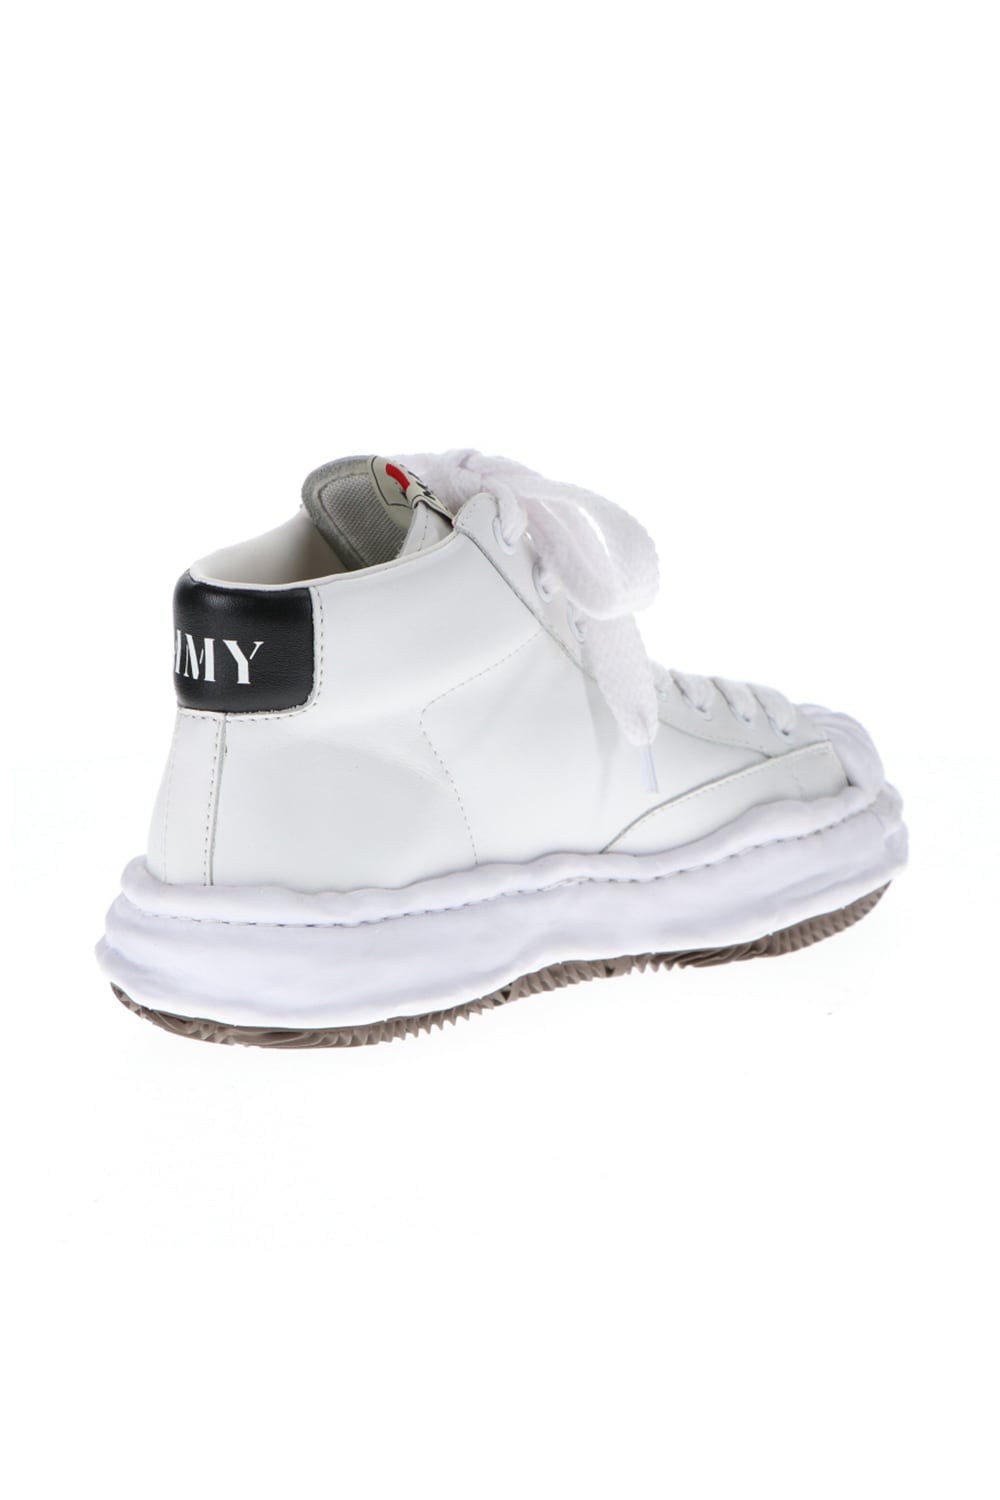 -BLAKEY High- Original STC sole leather Hi-top sneakers White